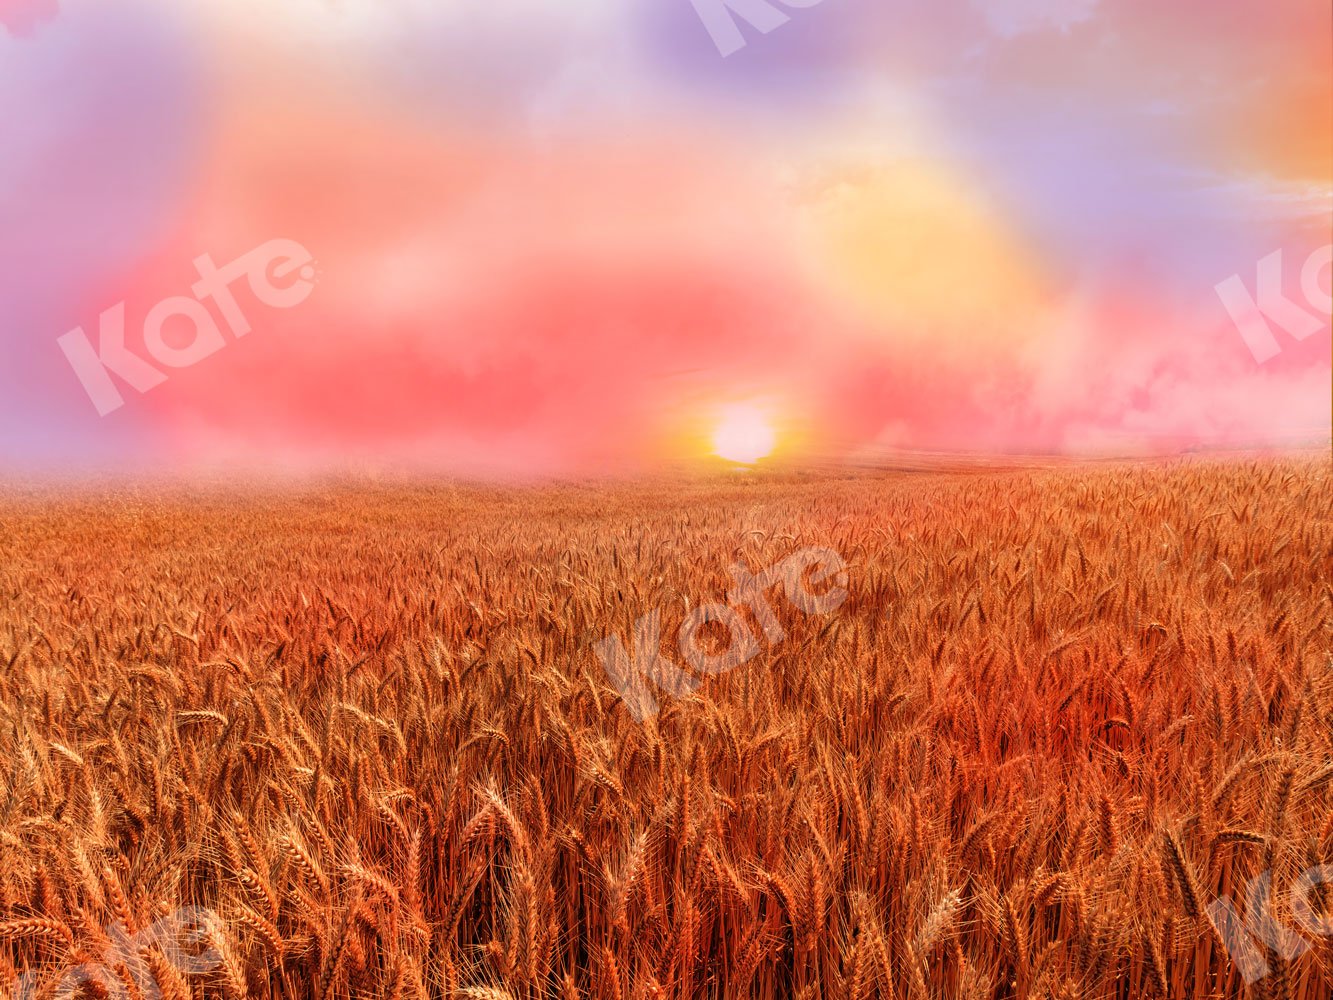 Kate Fall Backdrop Sunset Wheatfield for Photography